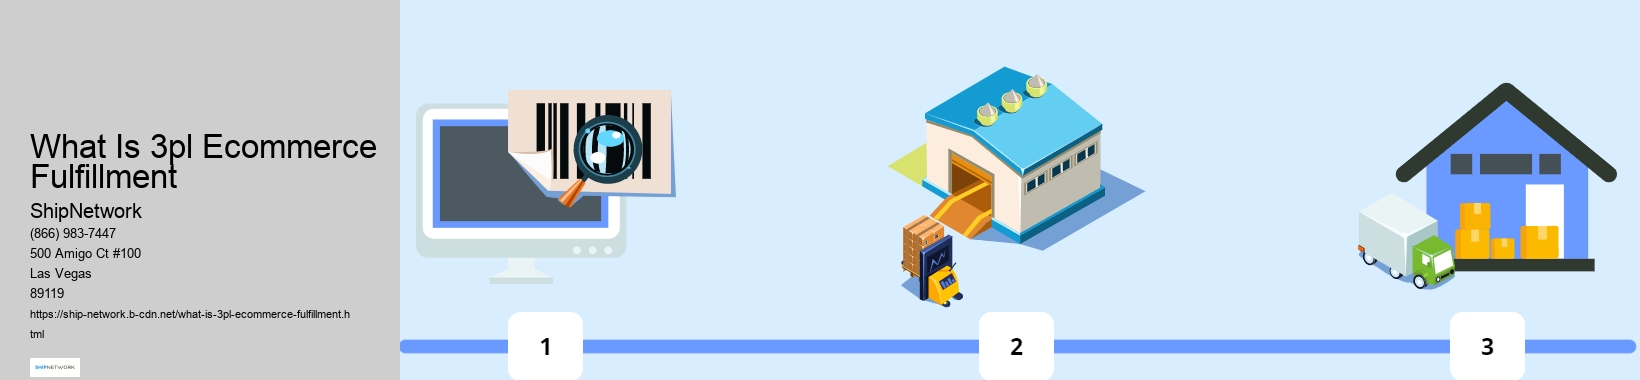 What Is 3pl Ecommerce Fulfillment